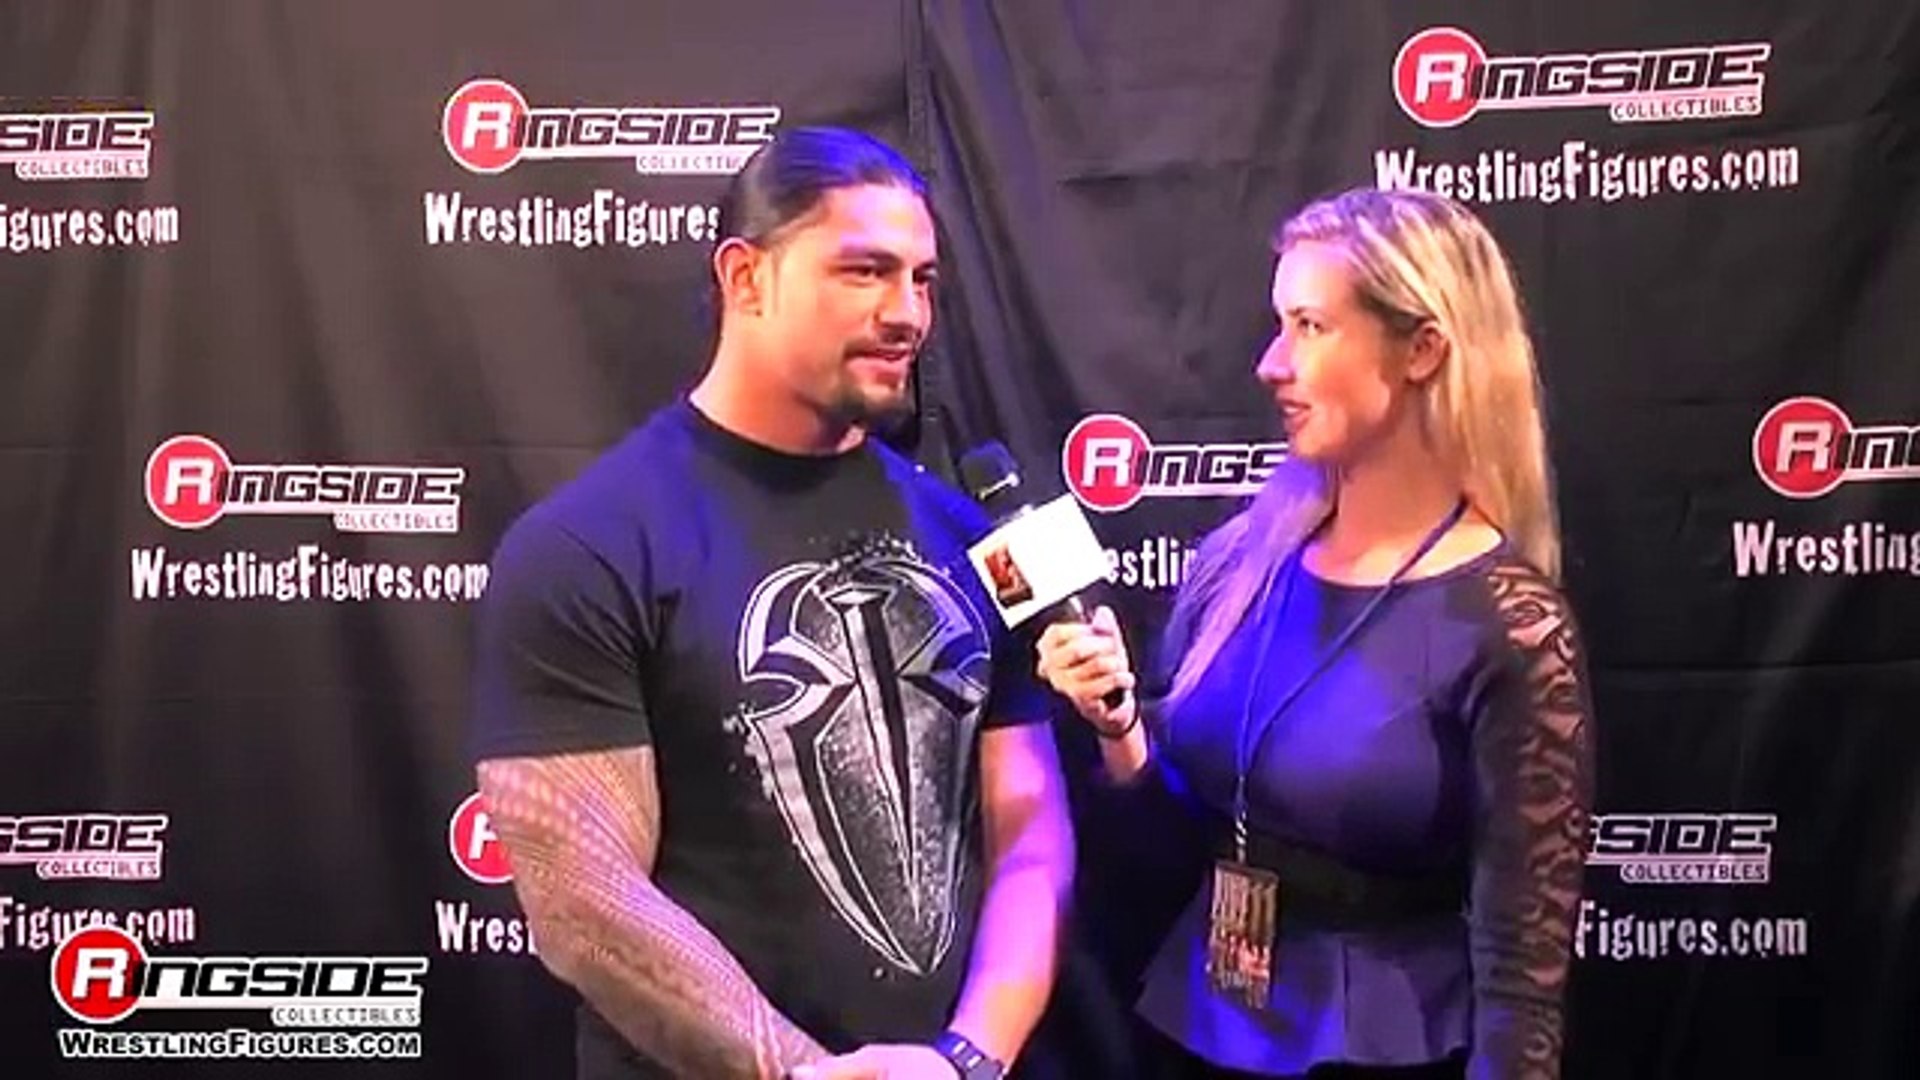 ⁣WWE - WWE News - ROMAN REIGNS INTERVIEW AT RINGSIDE FEST - Talking about future plans in WWE - WWE S